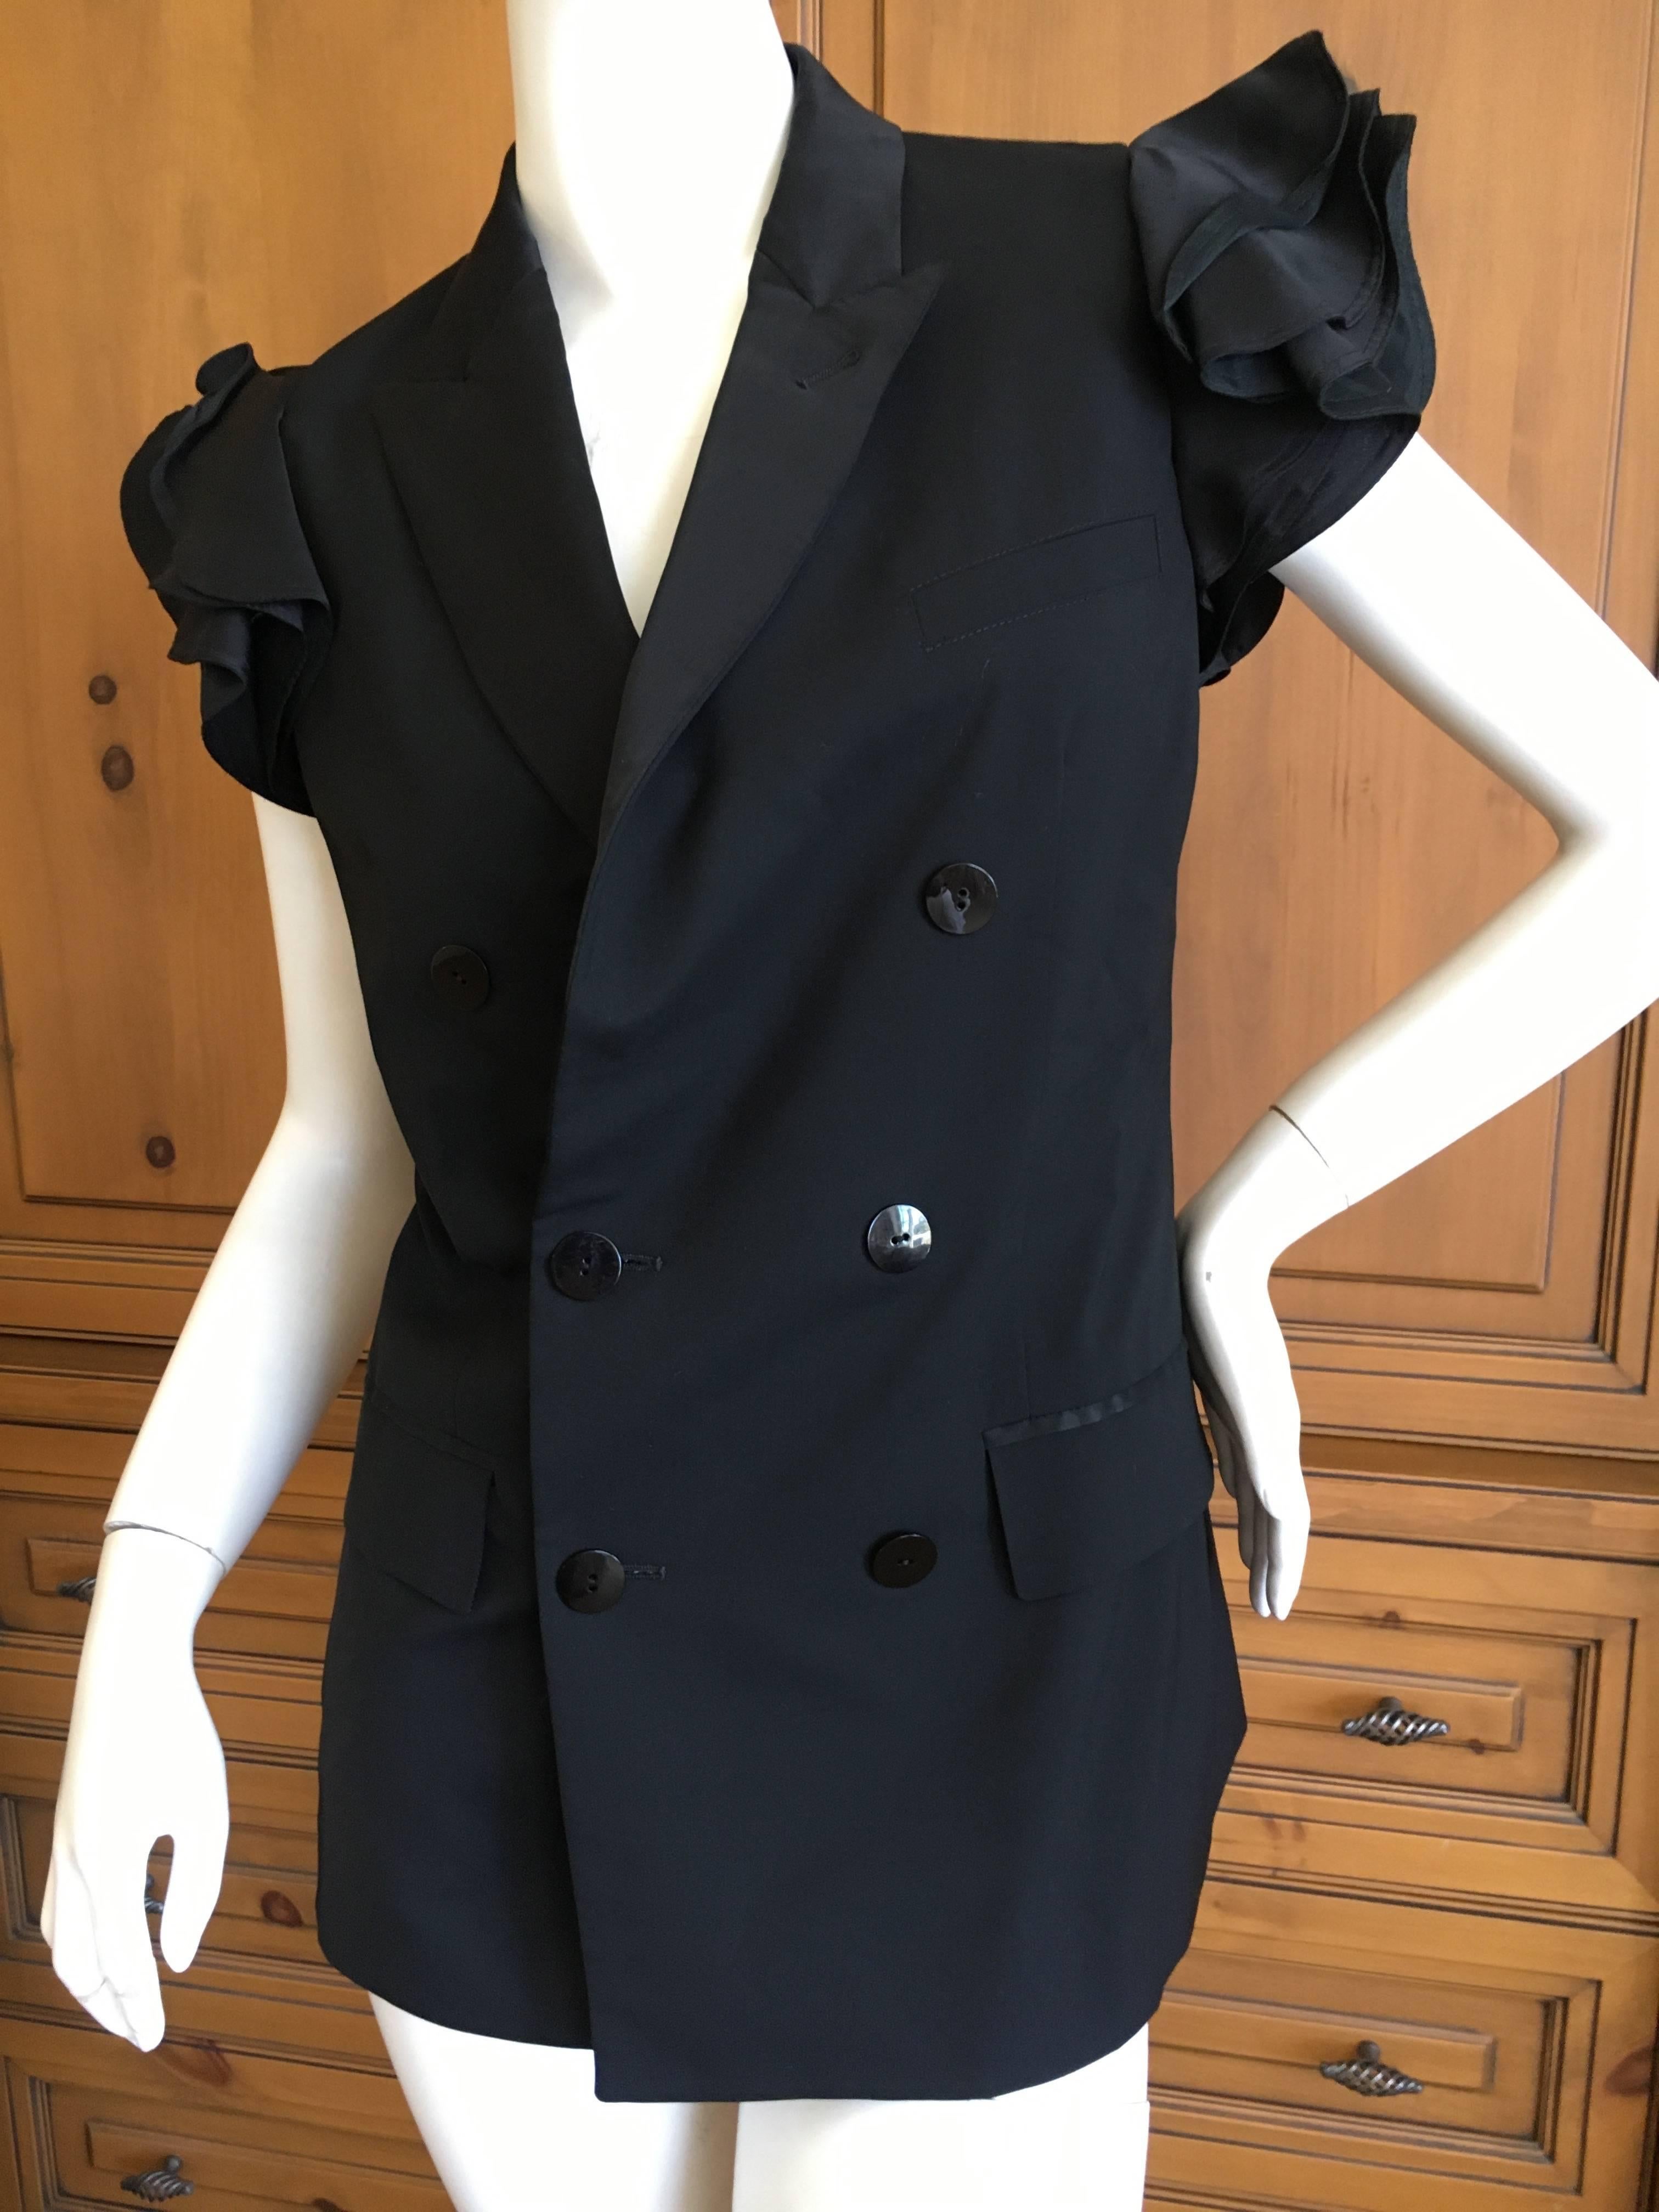 Jean Paul Gaultier Vintage Black Sleeveless Double Breasted Jacket with Ruffles In Excellent Condition For Sale In Cloverdale, CA